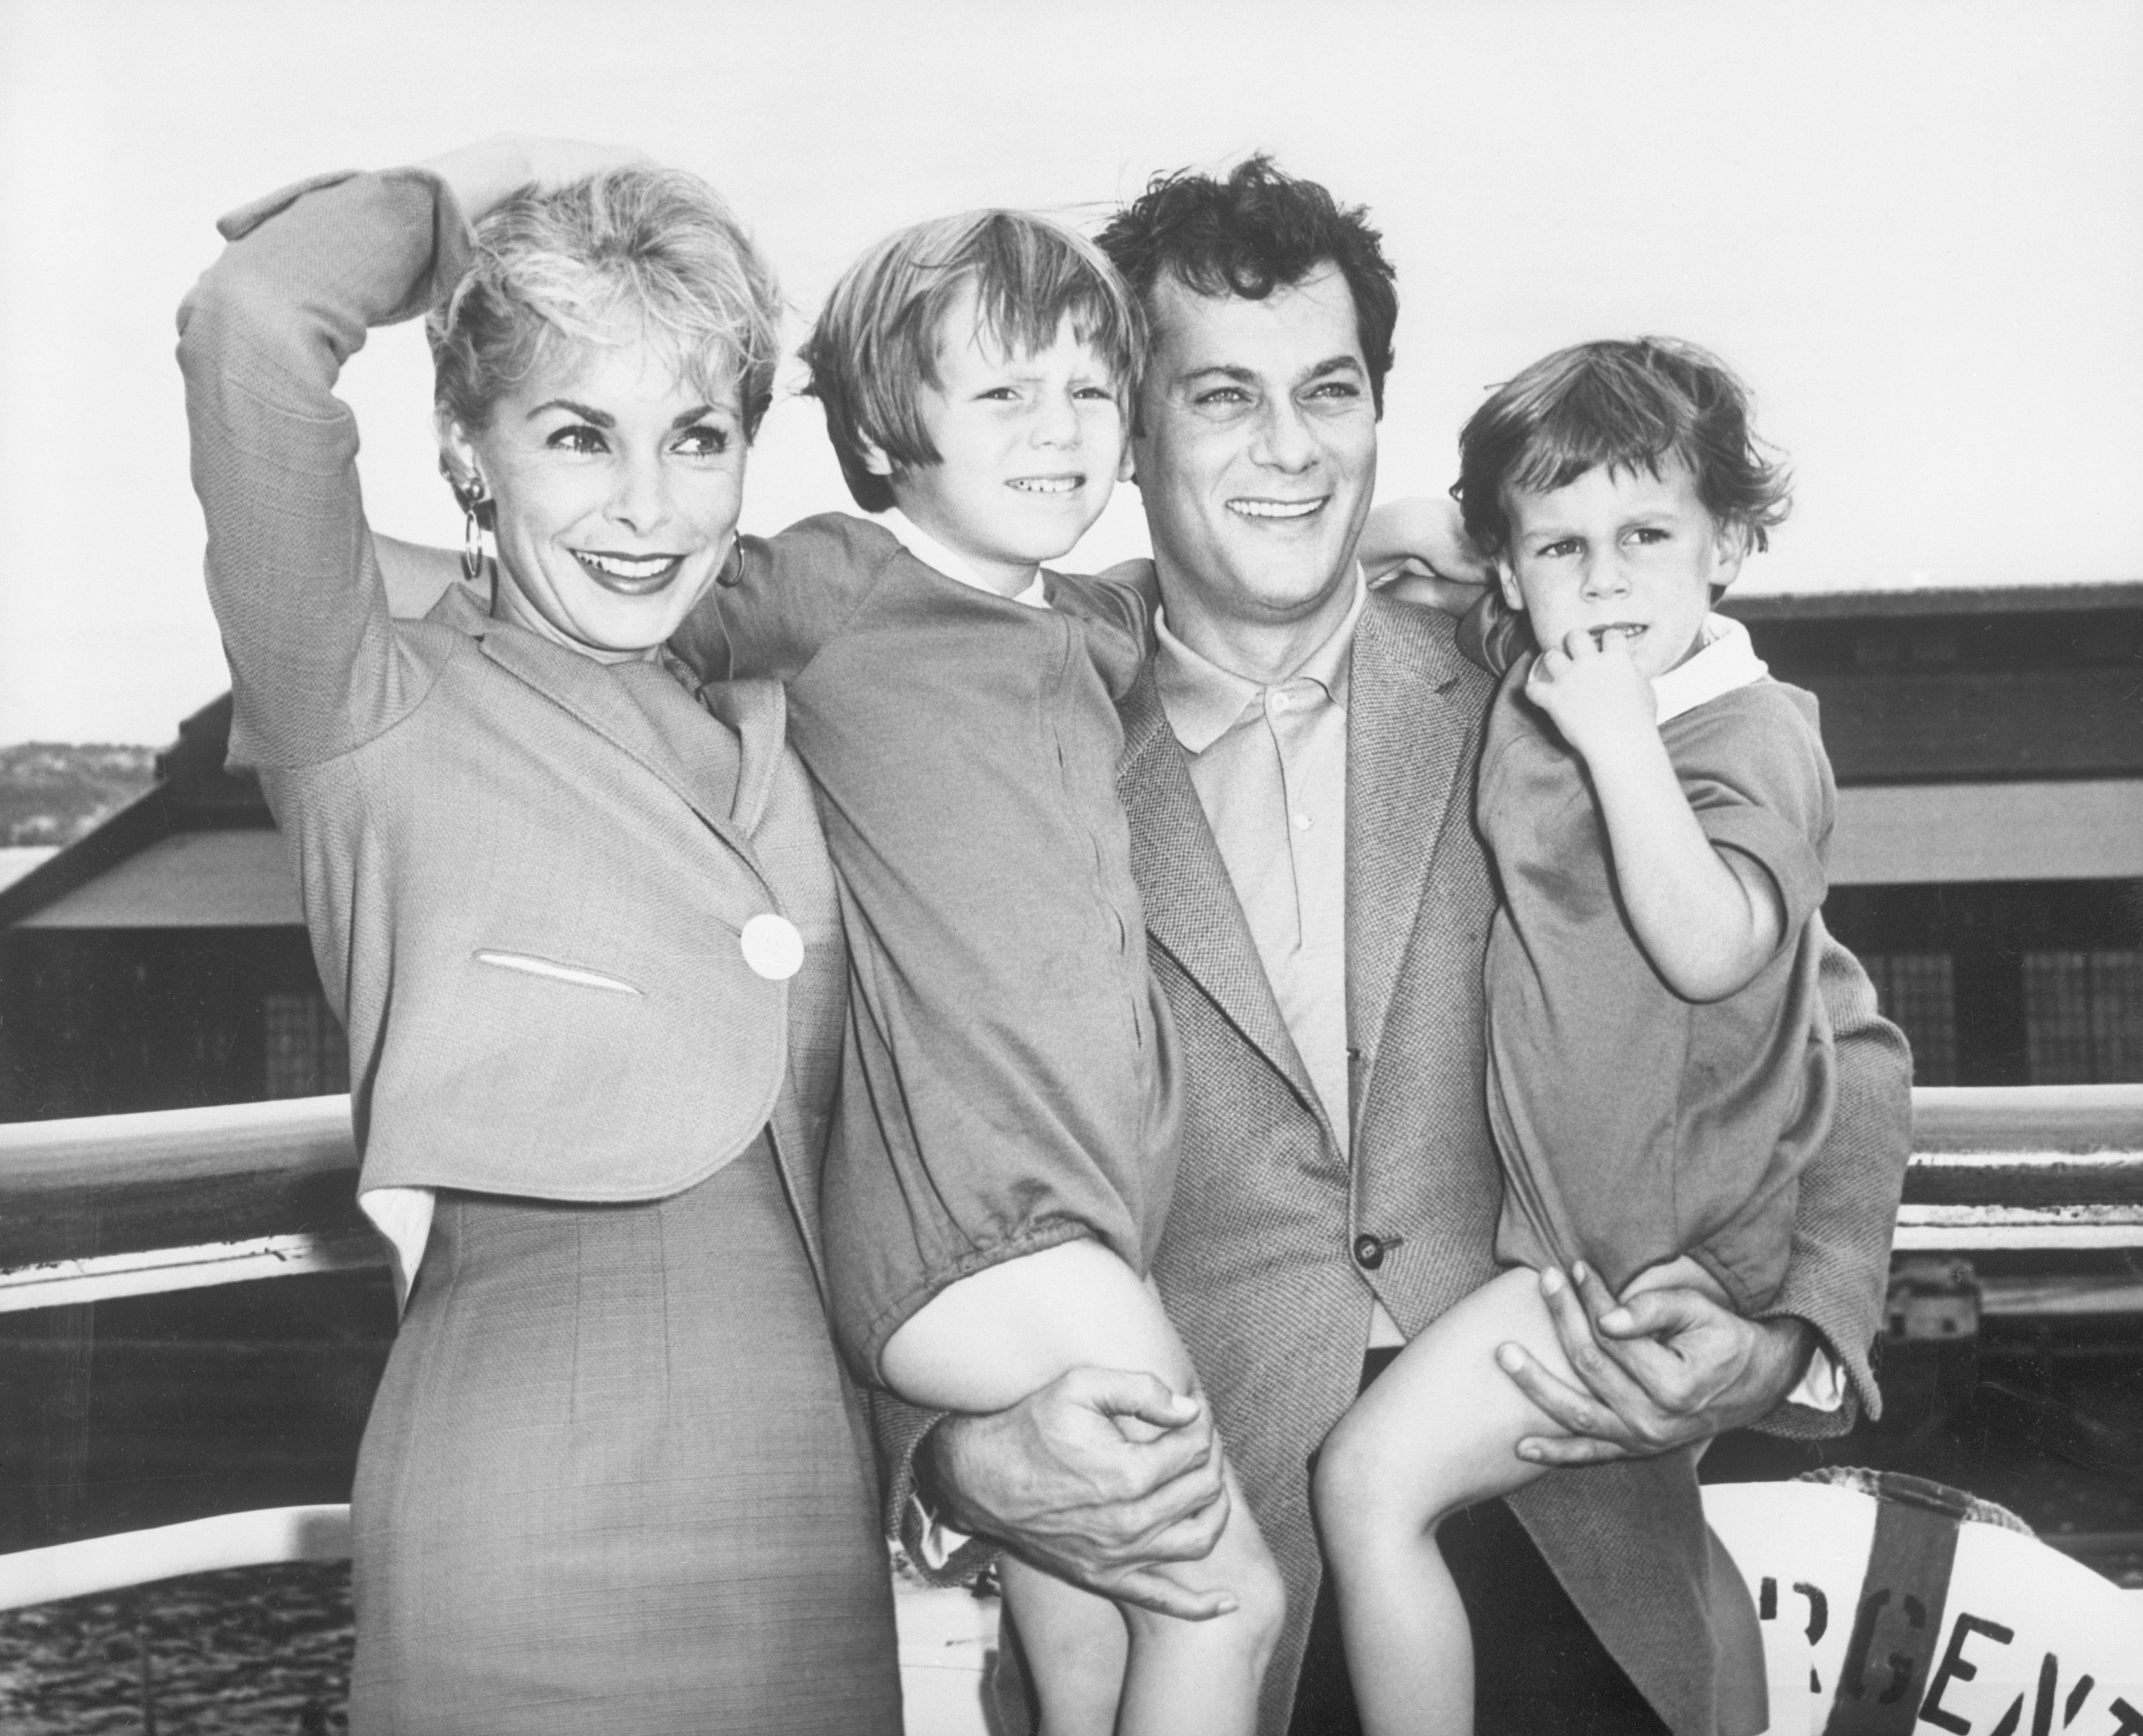 Actor Tony Curtis and his wife actress Janet Leigh pictured with their children, Kelly and Jamie on September 15, 1961 in New York, New York ┃Source: Getty Images